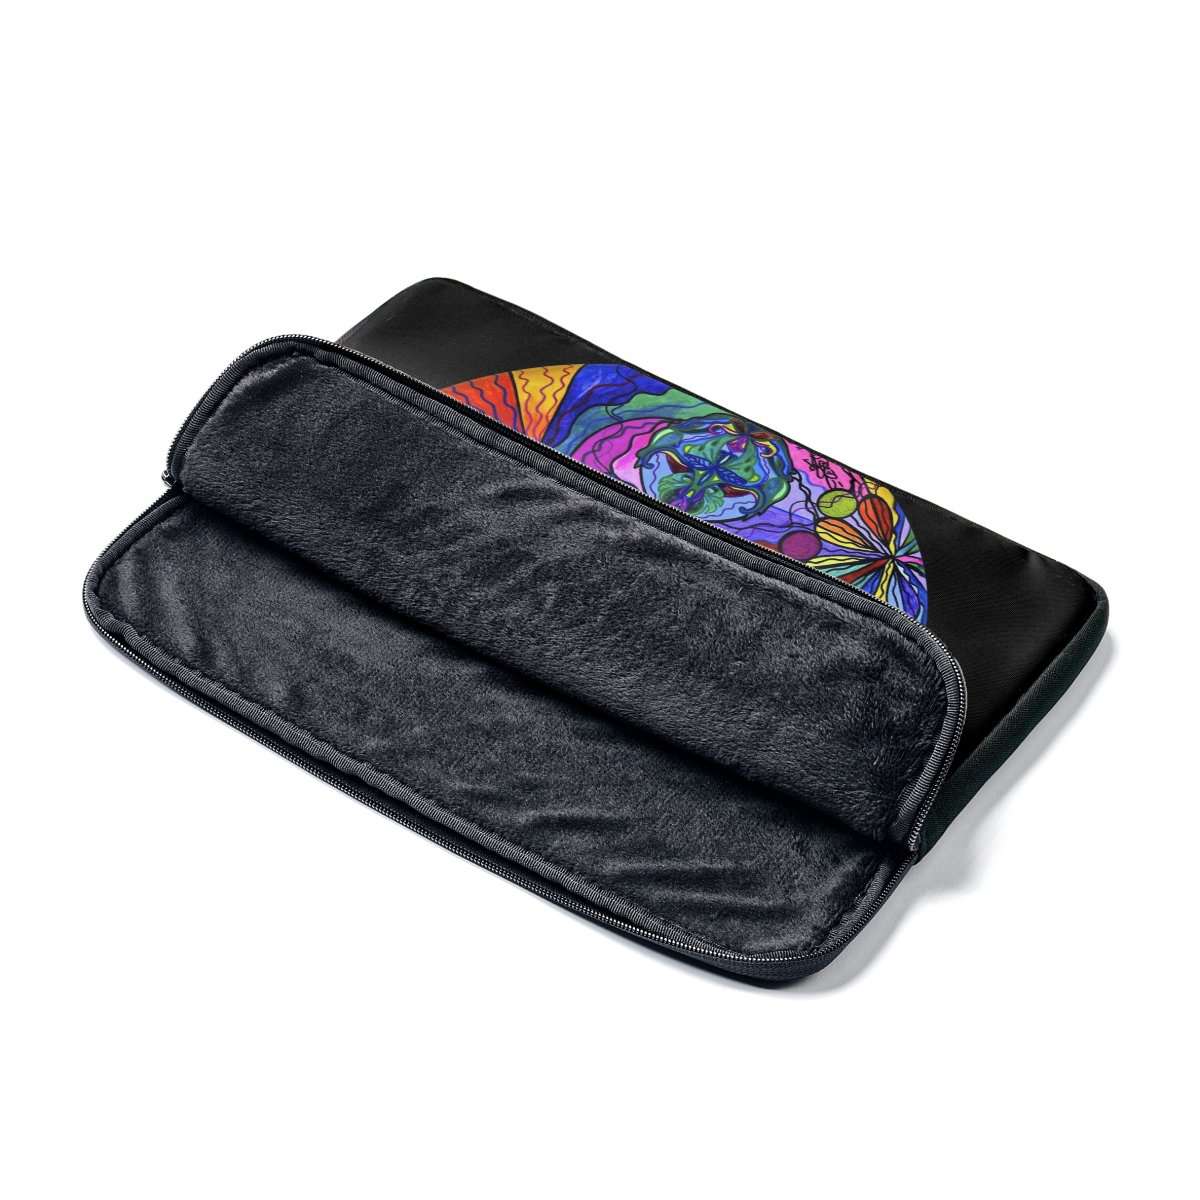 shop-without-worry-for-awakened-poet-laptop-sleeve-on-sale_2.jpg